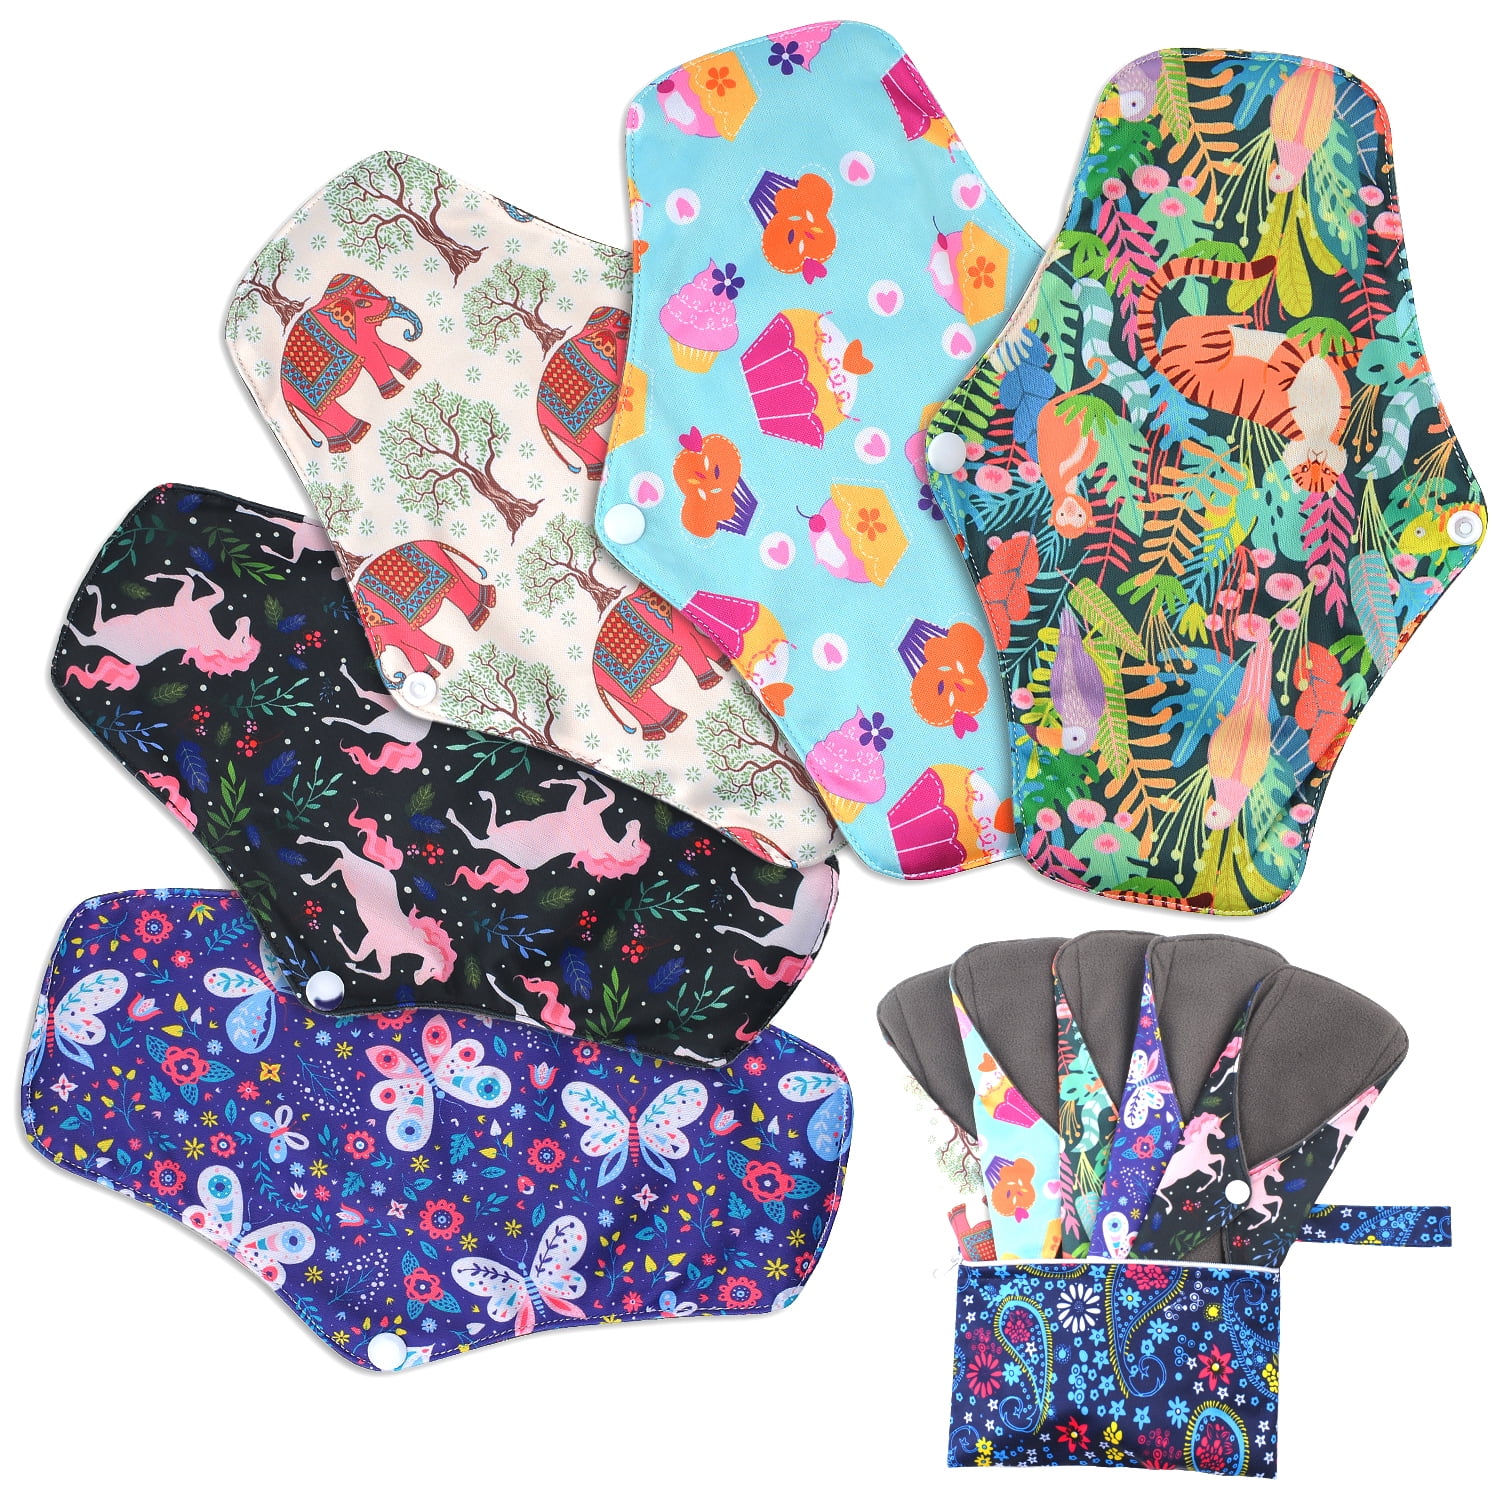 6Pcs Reusable Menstrual Pads with Wet Bag,Washable Bamboo Cloth Pads ...